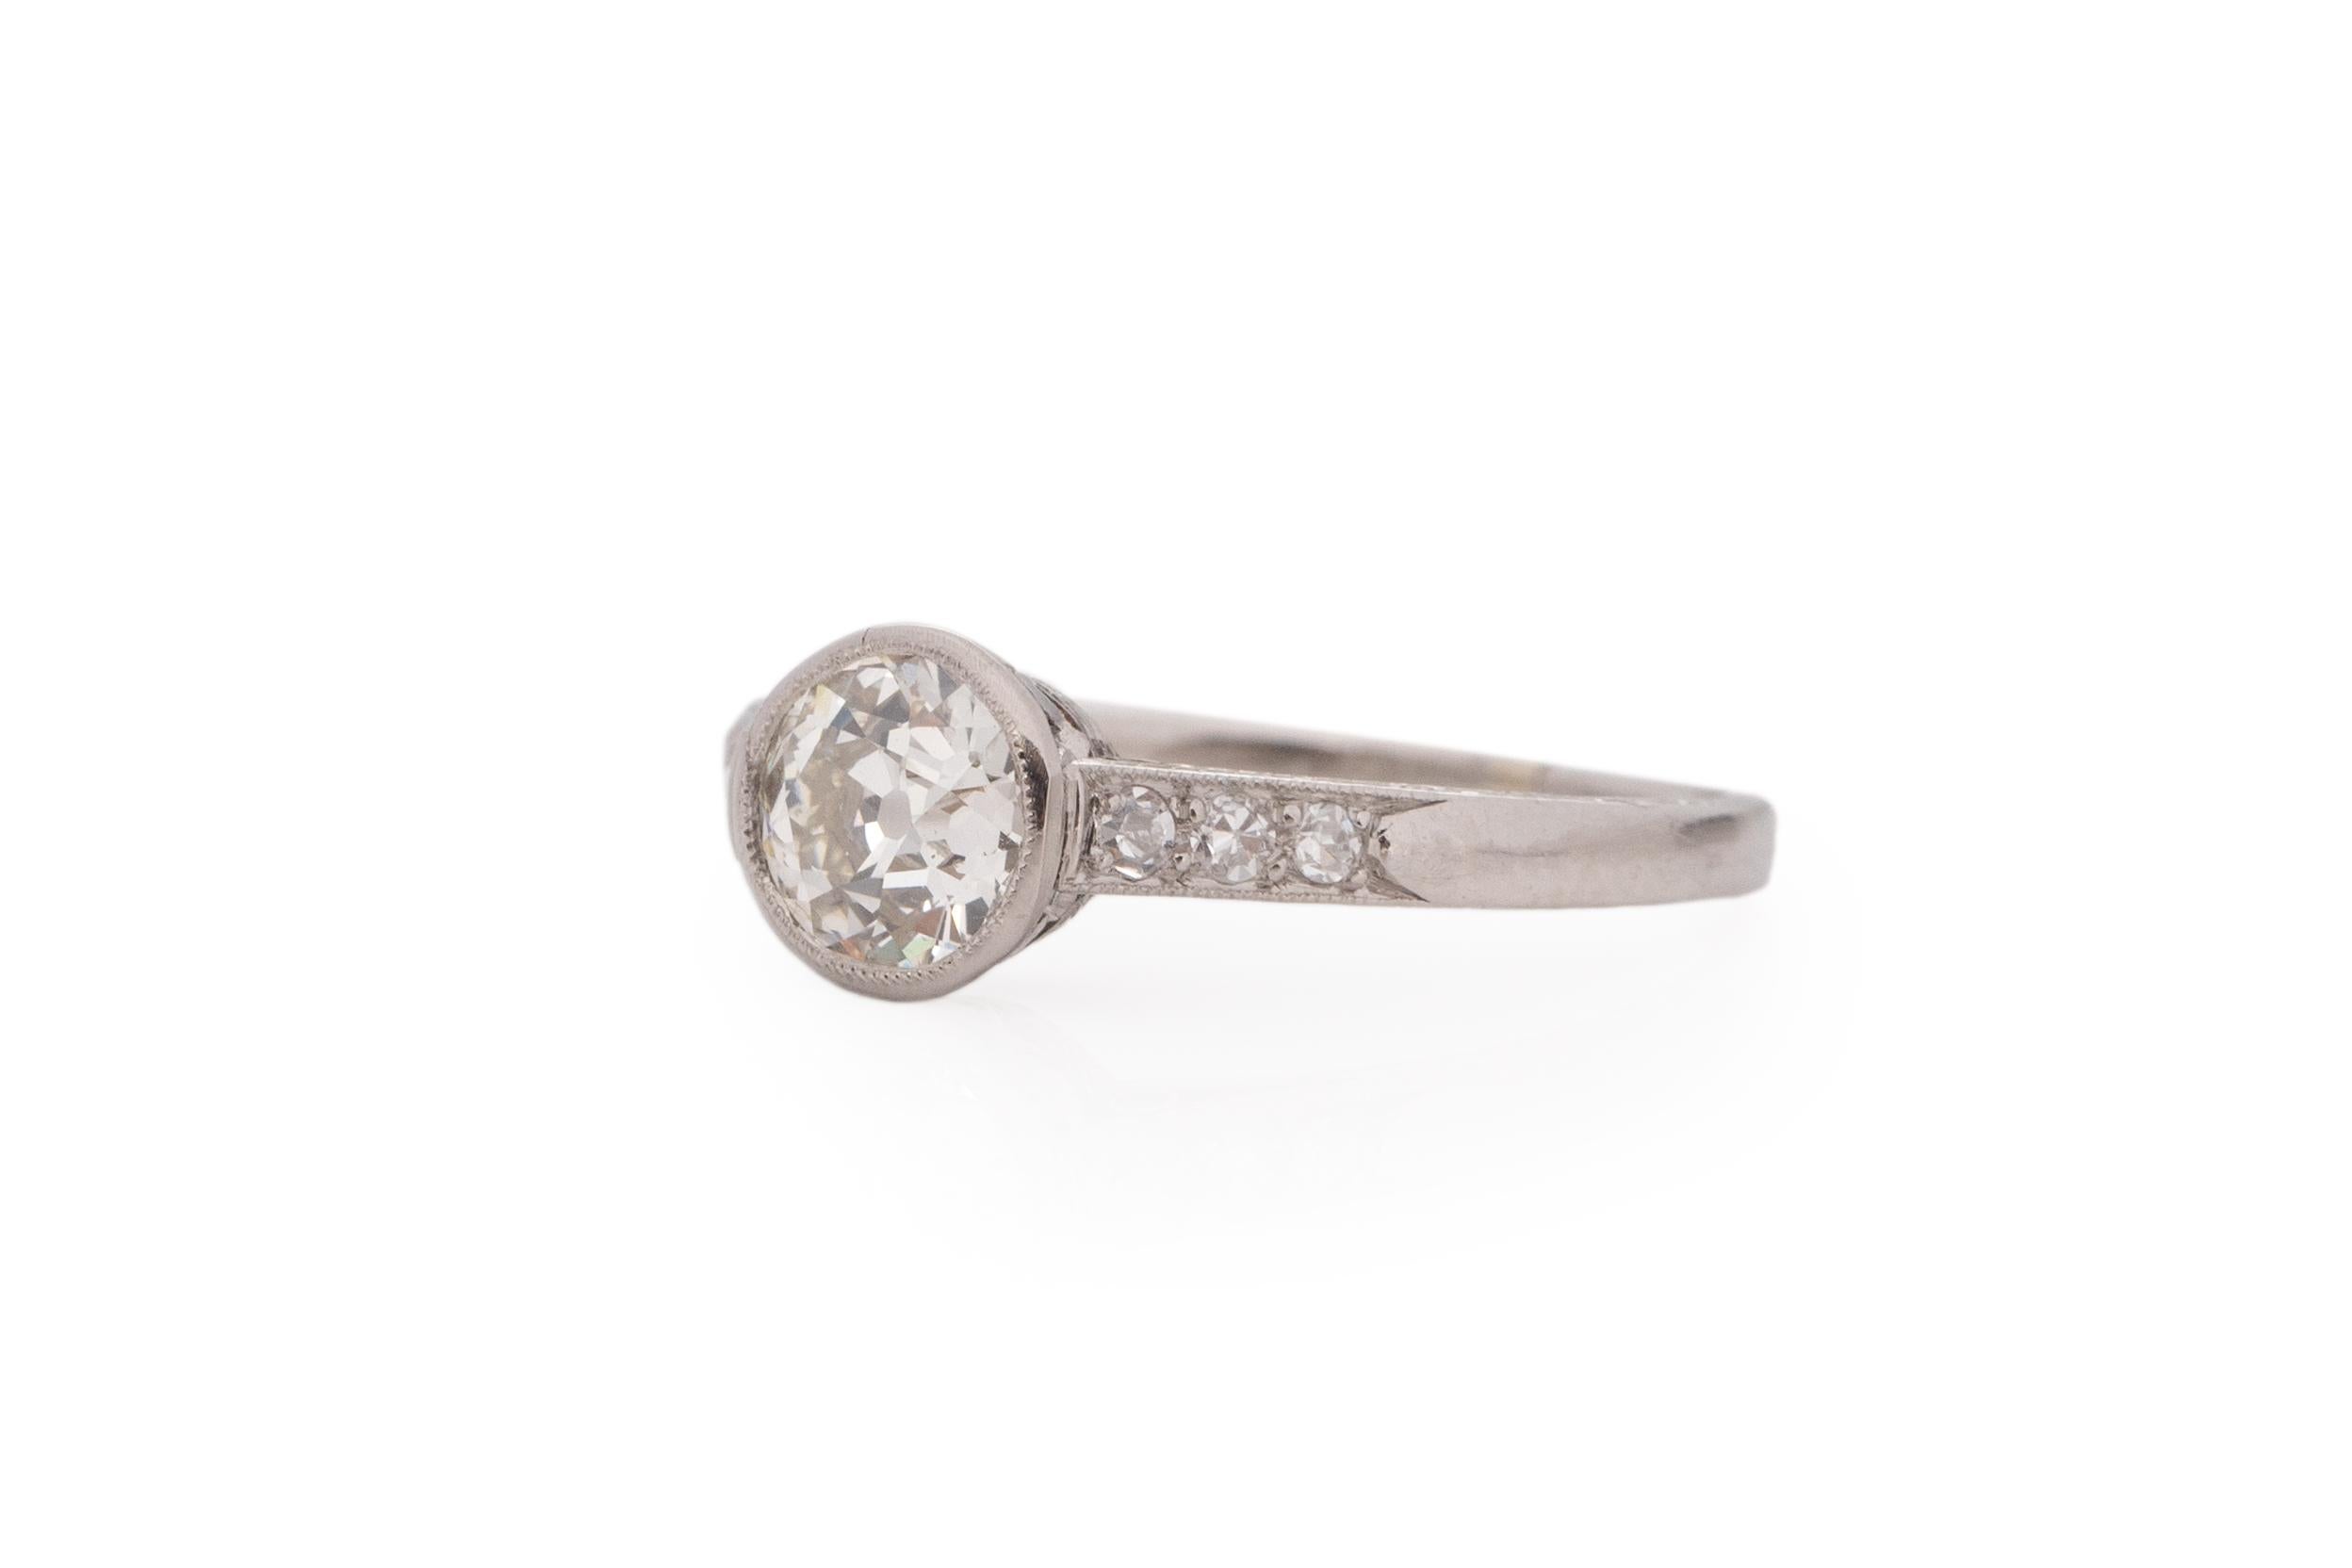 Ring Size: 7.5
Metal Type: Platinum [Hallmarked, and Tested]
Weight: 3.0 grams

Center Diamond Details:
Weight: .90carat
Cut: Old European brilliant
Color: J
Clarity: SI1

Side Stone Details:
Weight: .15carat, total weight
Cut: Antique European